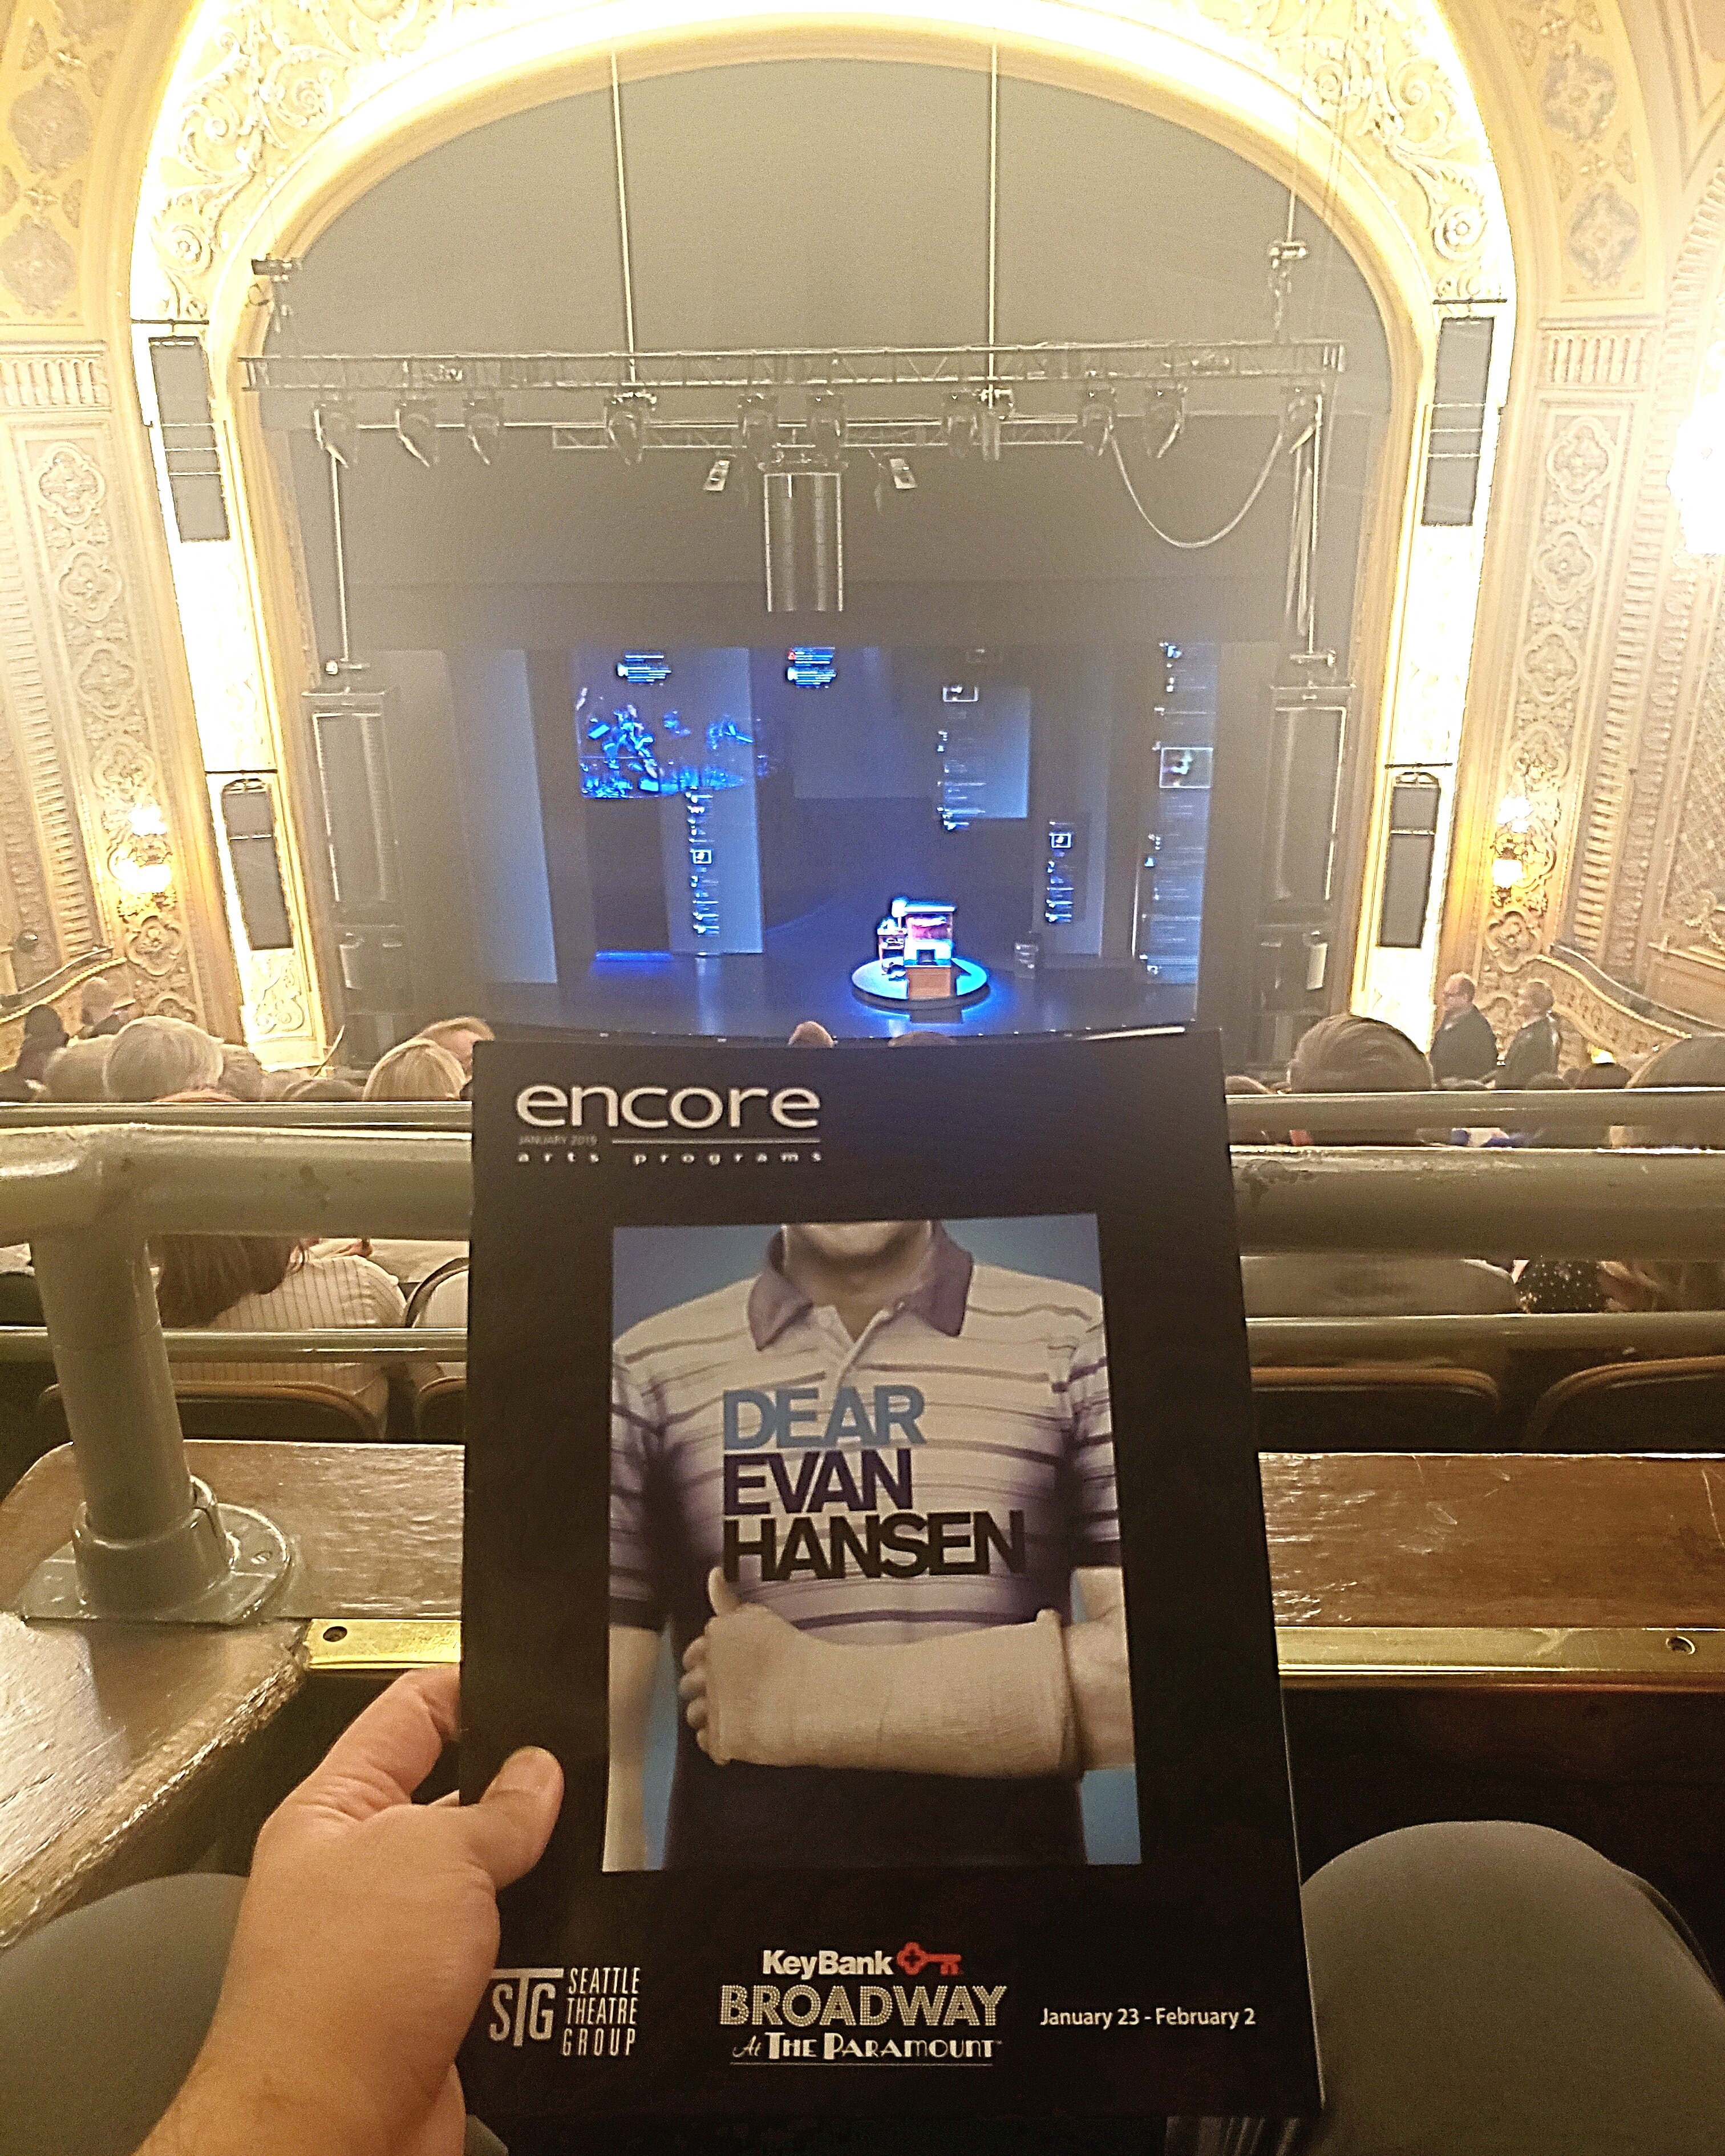 #Soldout run of the Tony Awards & Grammy Awards-winning #musical Dear Evan Hansen at Paramount Theatre. #Slow & didn't live up to the #hype. Not a fan of #highschool #teenager storylines. Amazing #projections & #lighting.